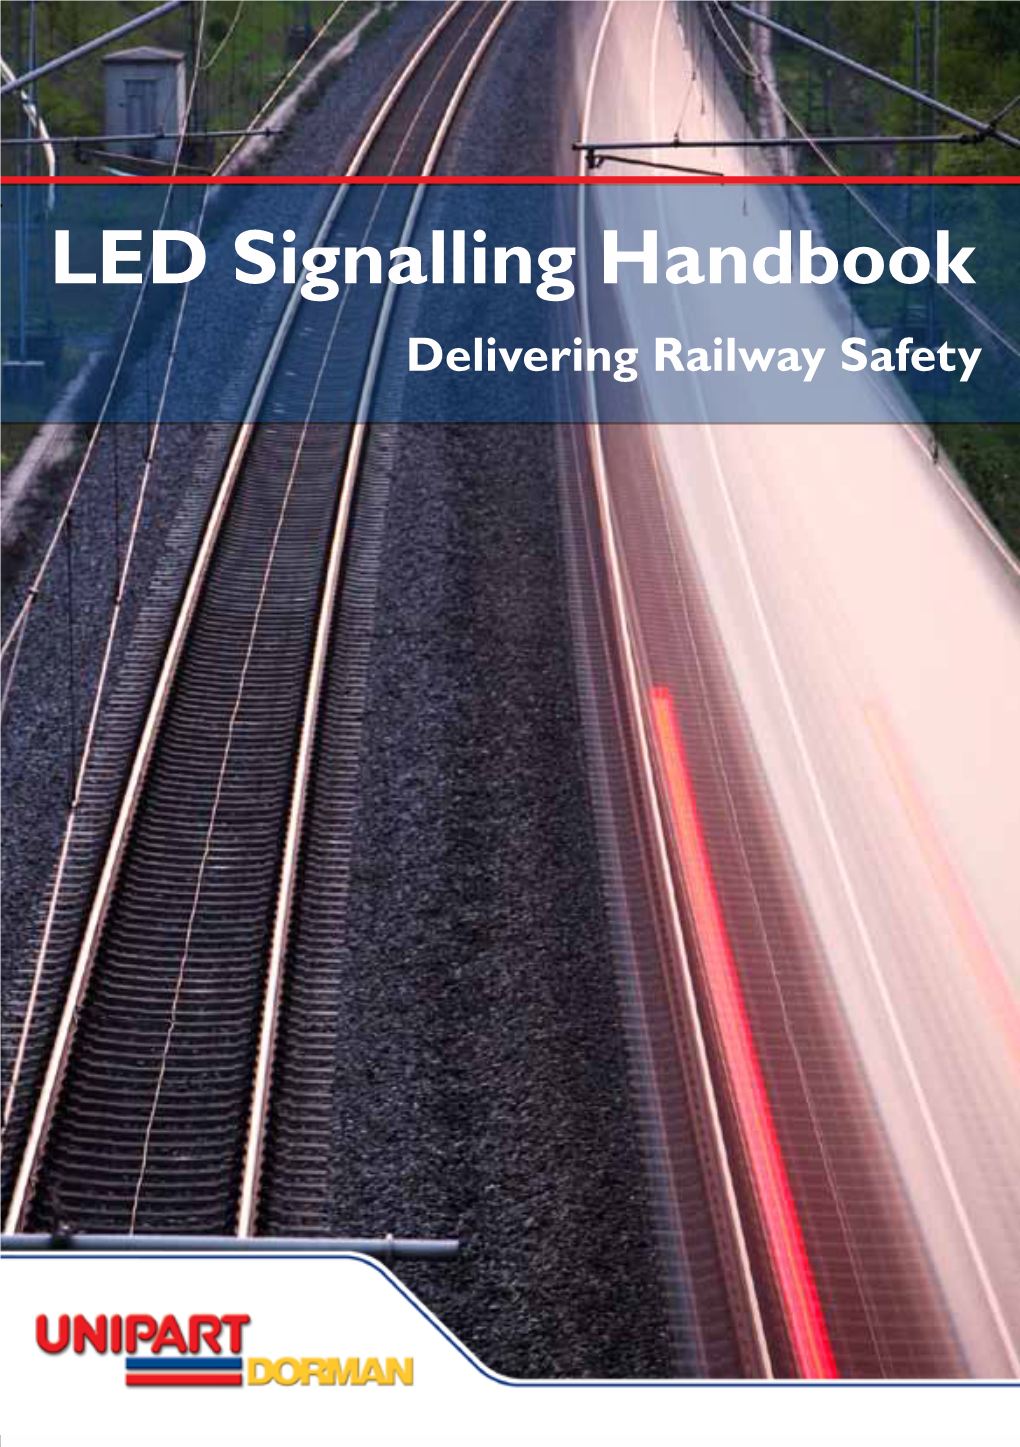 LED Signalling Handbook Delivering Railway Safety Contents the Next Generation of Page Railway Signal 3 Introduction to Unipart Dorman